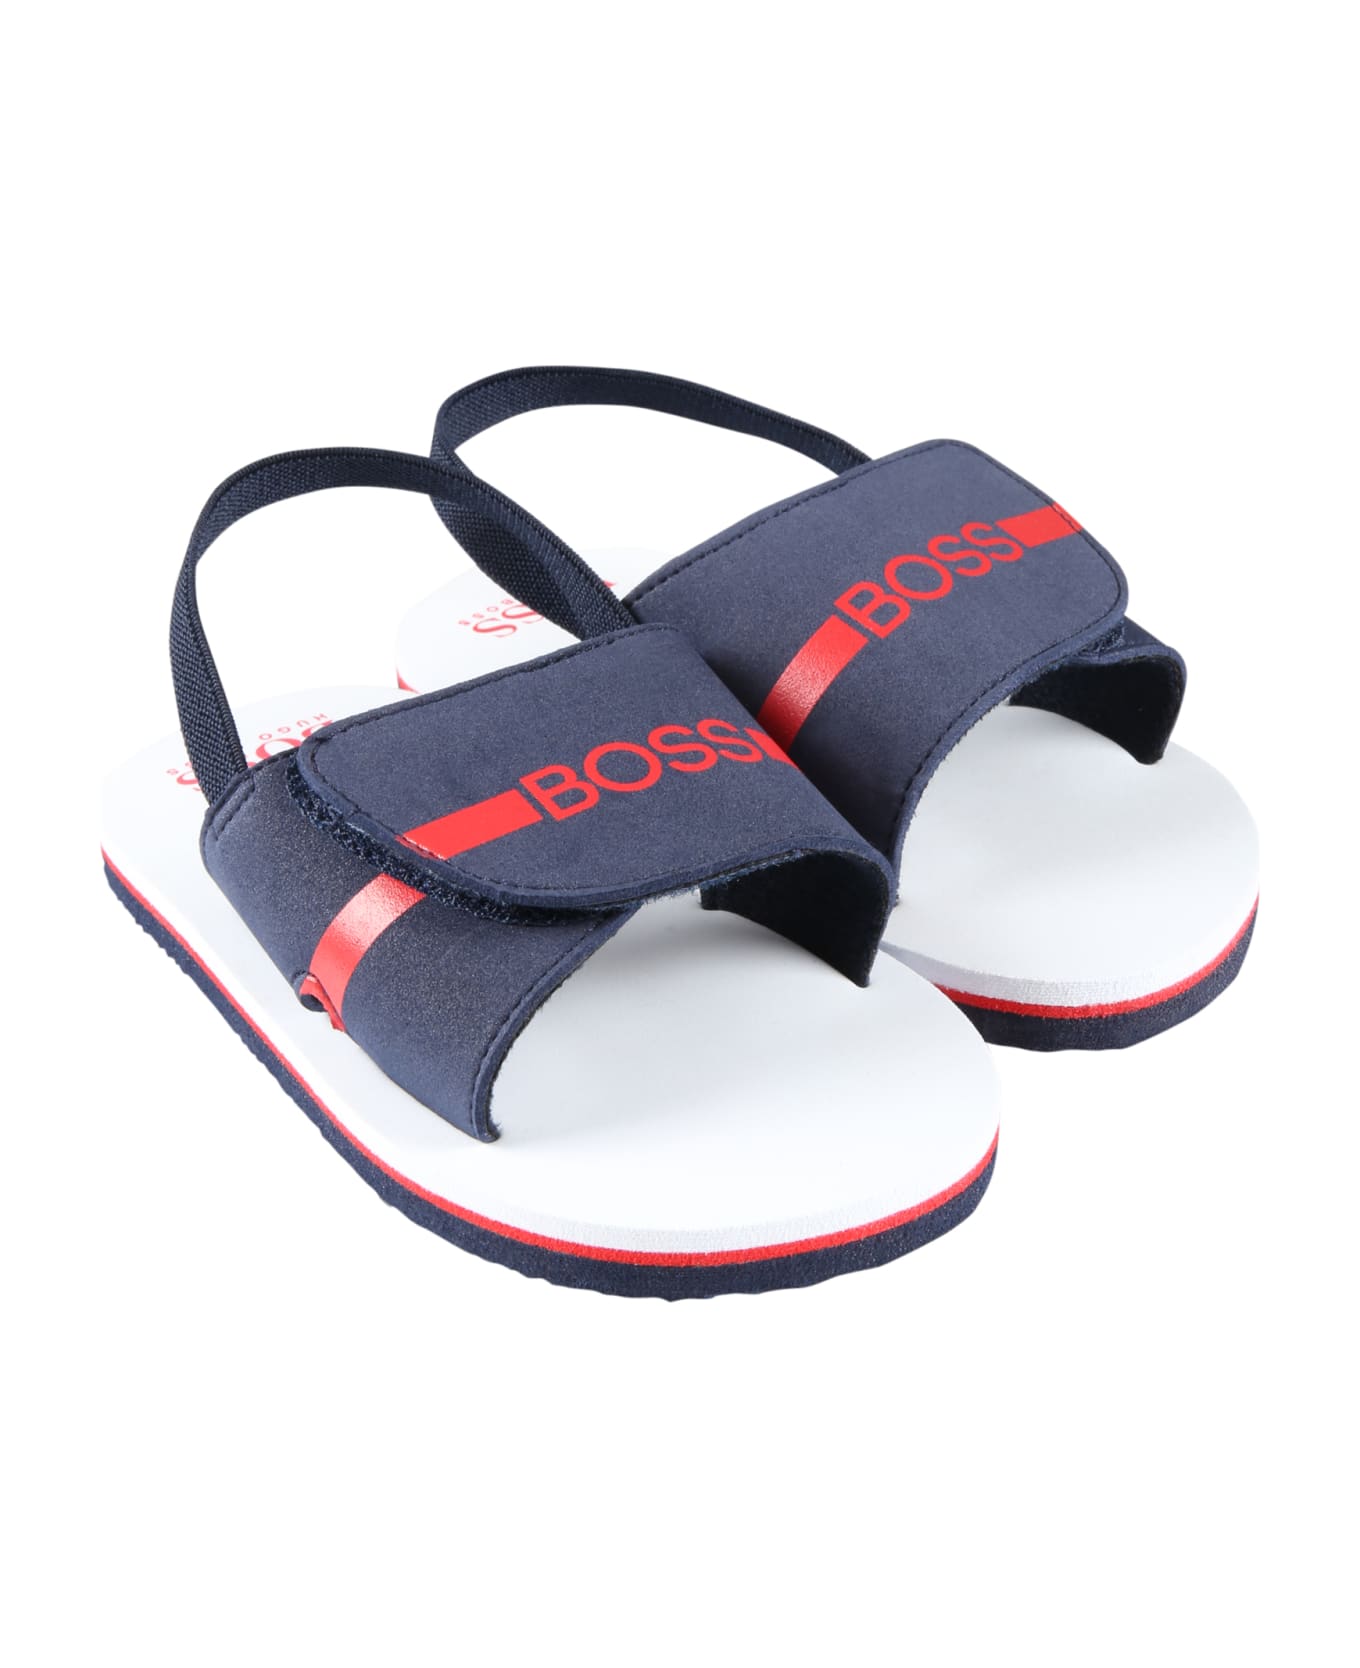 Hugo Boss Blue Sandals For Boy With Red Logo - Blue シューズ